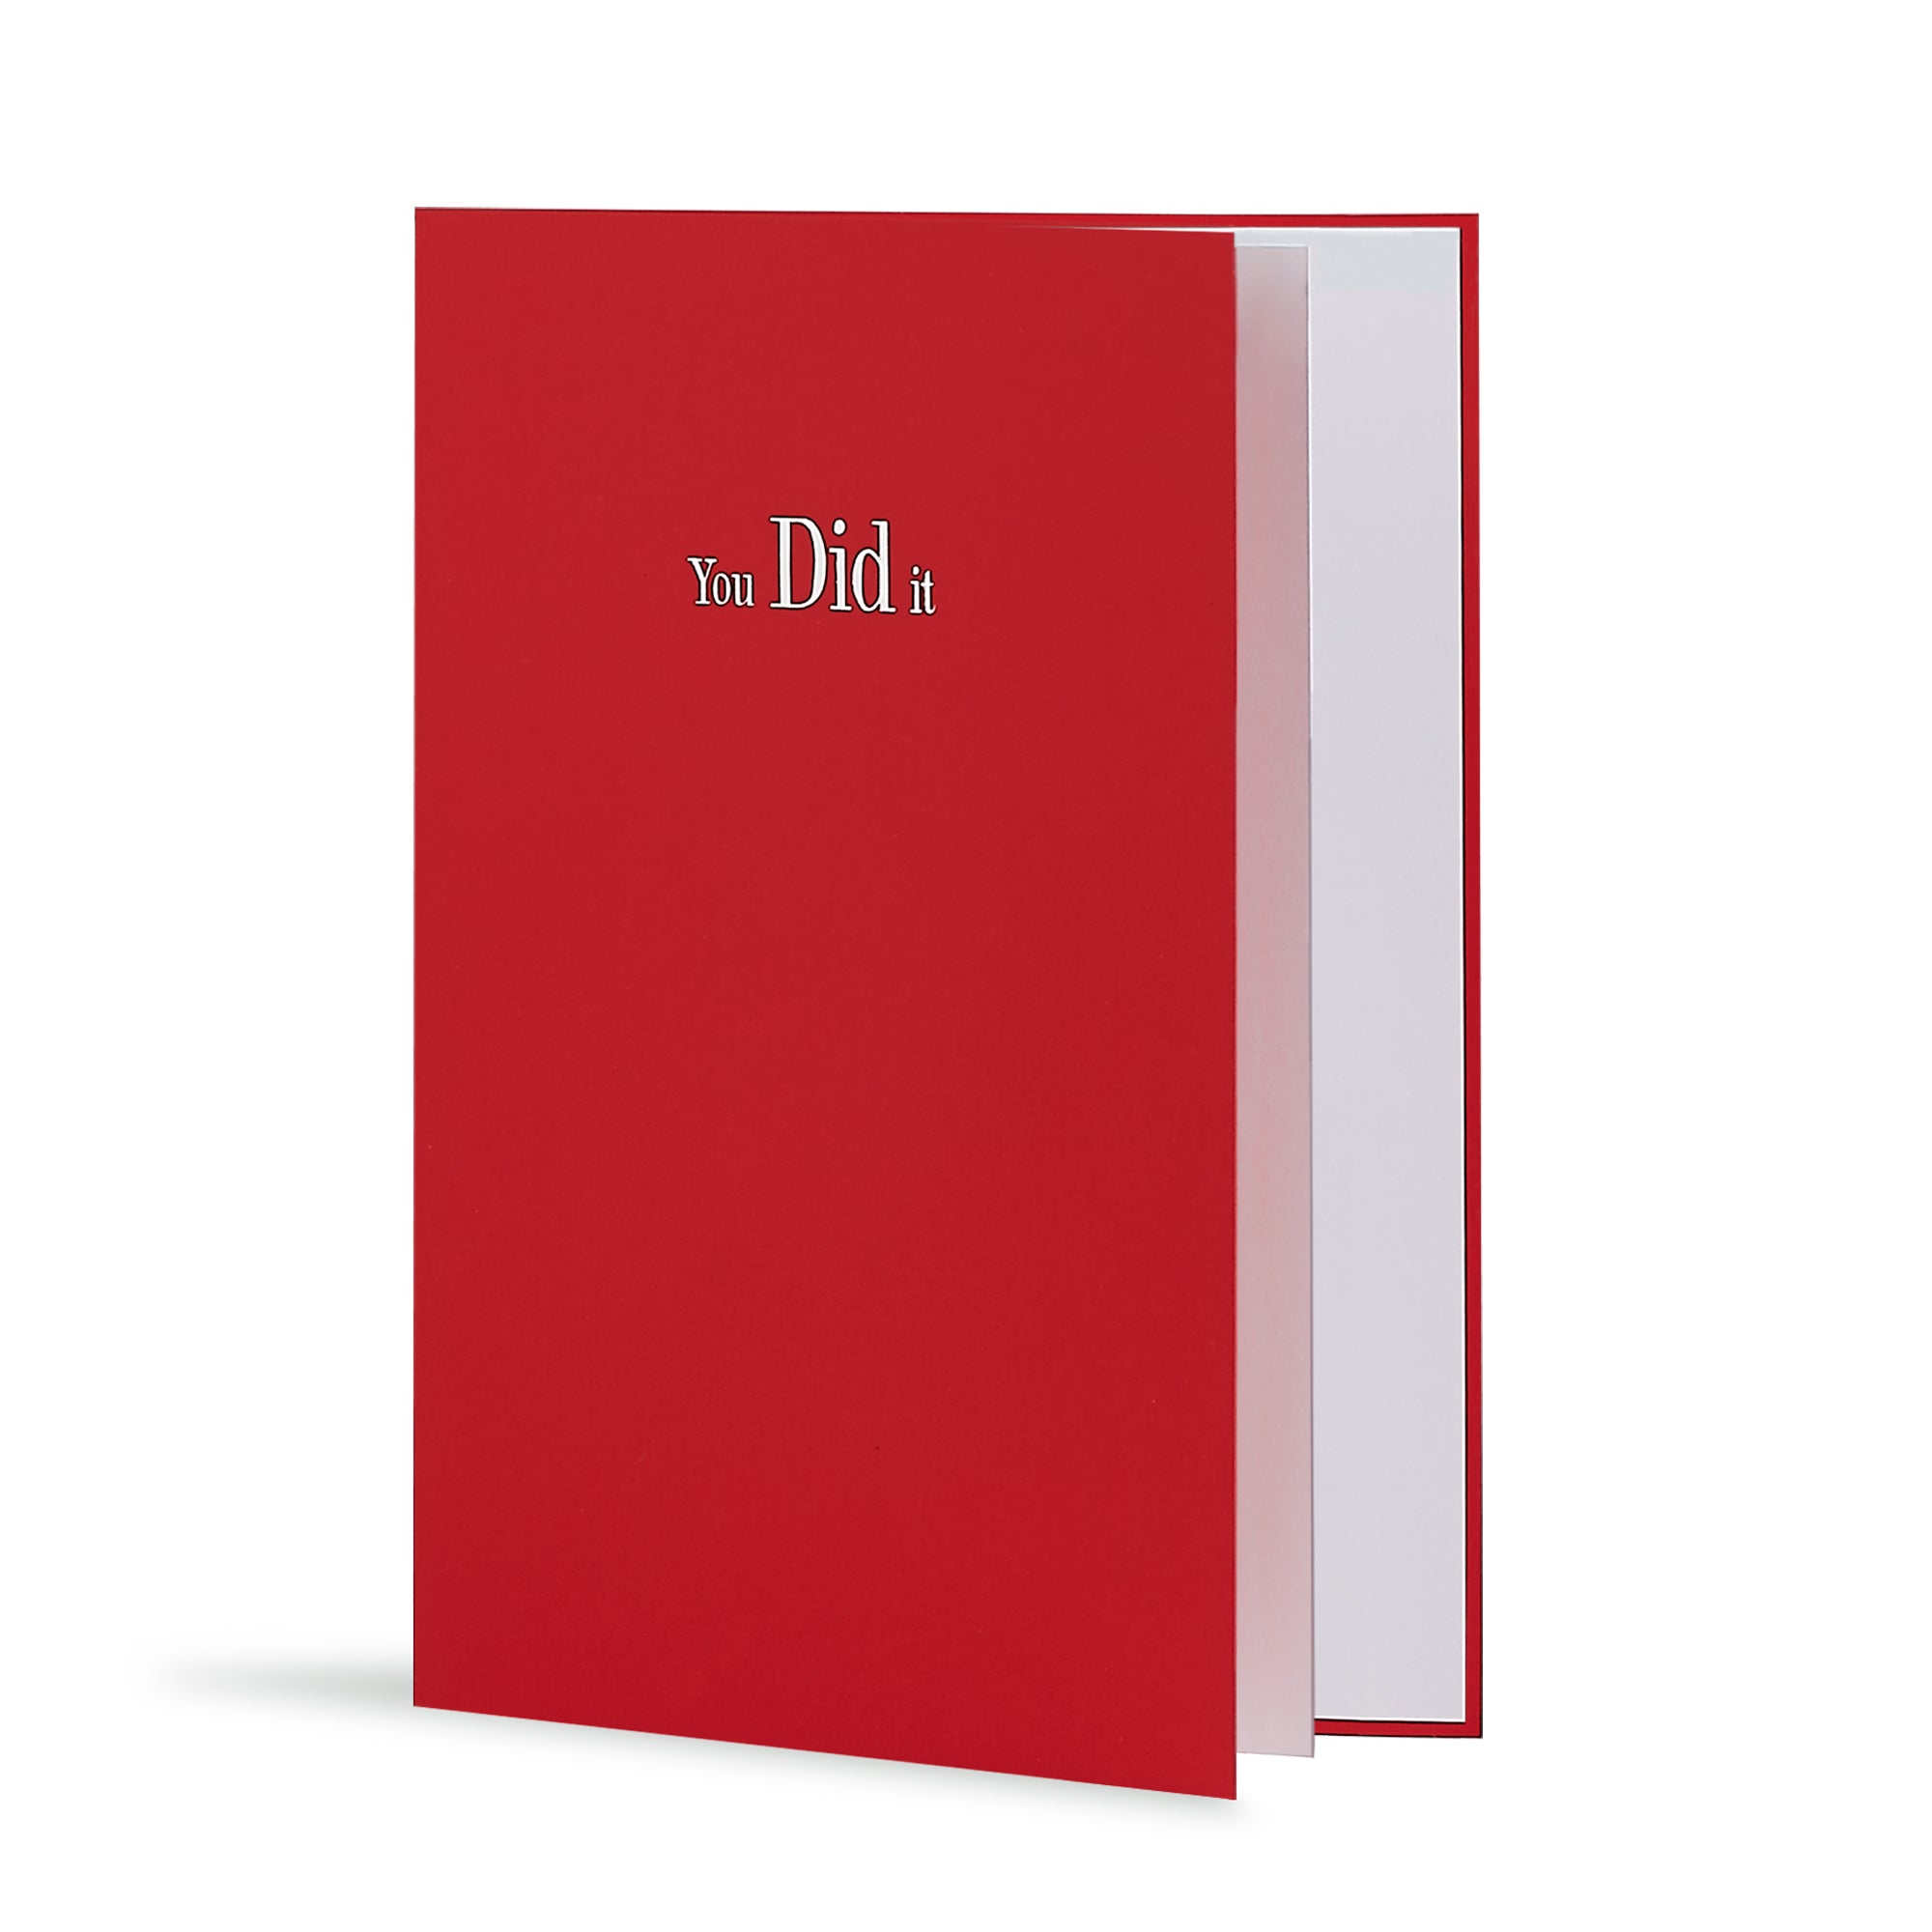 You Did It Greeting Card in Bright Red, Side